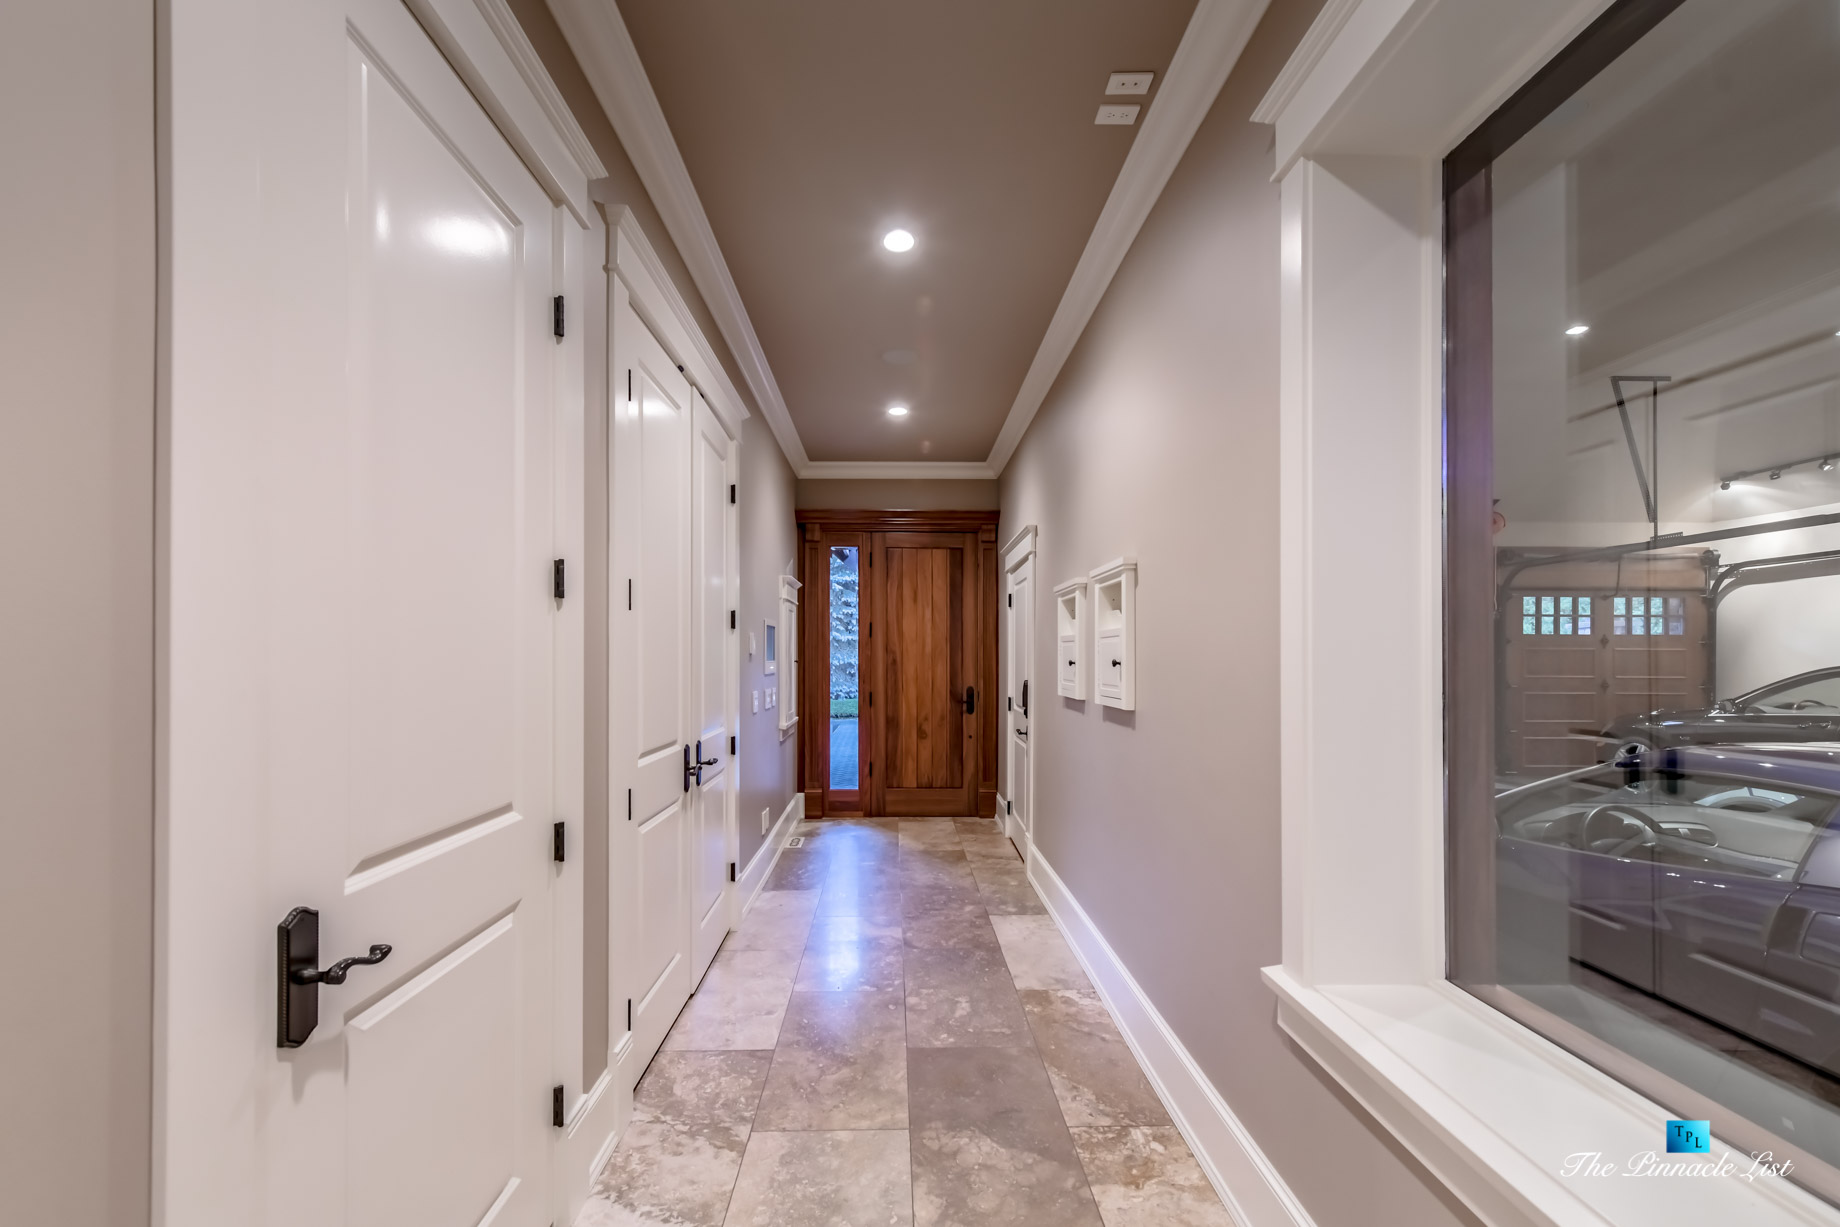 3053 Anmore Creek Way, Anmore, BC, Canada – Garage Hallway – Luxury Real Estate – Greater Vancouver Home